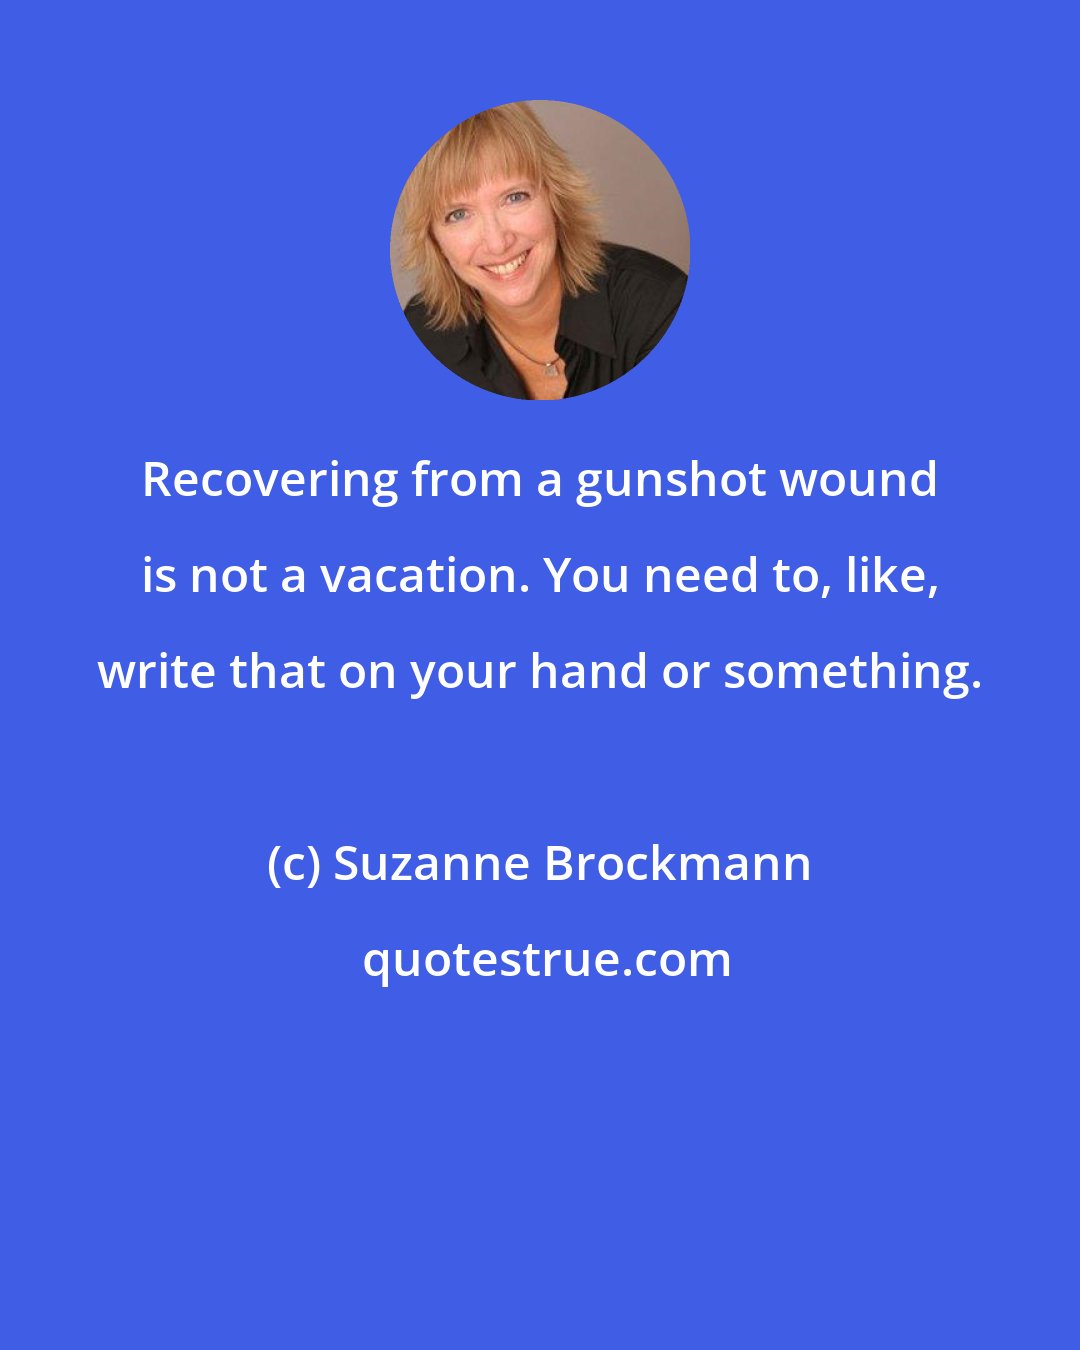 Suzanne Brockmann: Recovering from a gunshot wound is not a vacation. You need to, like, write that on your hand or something.